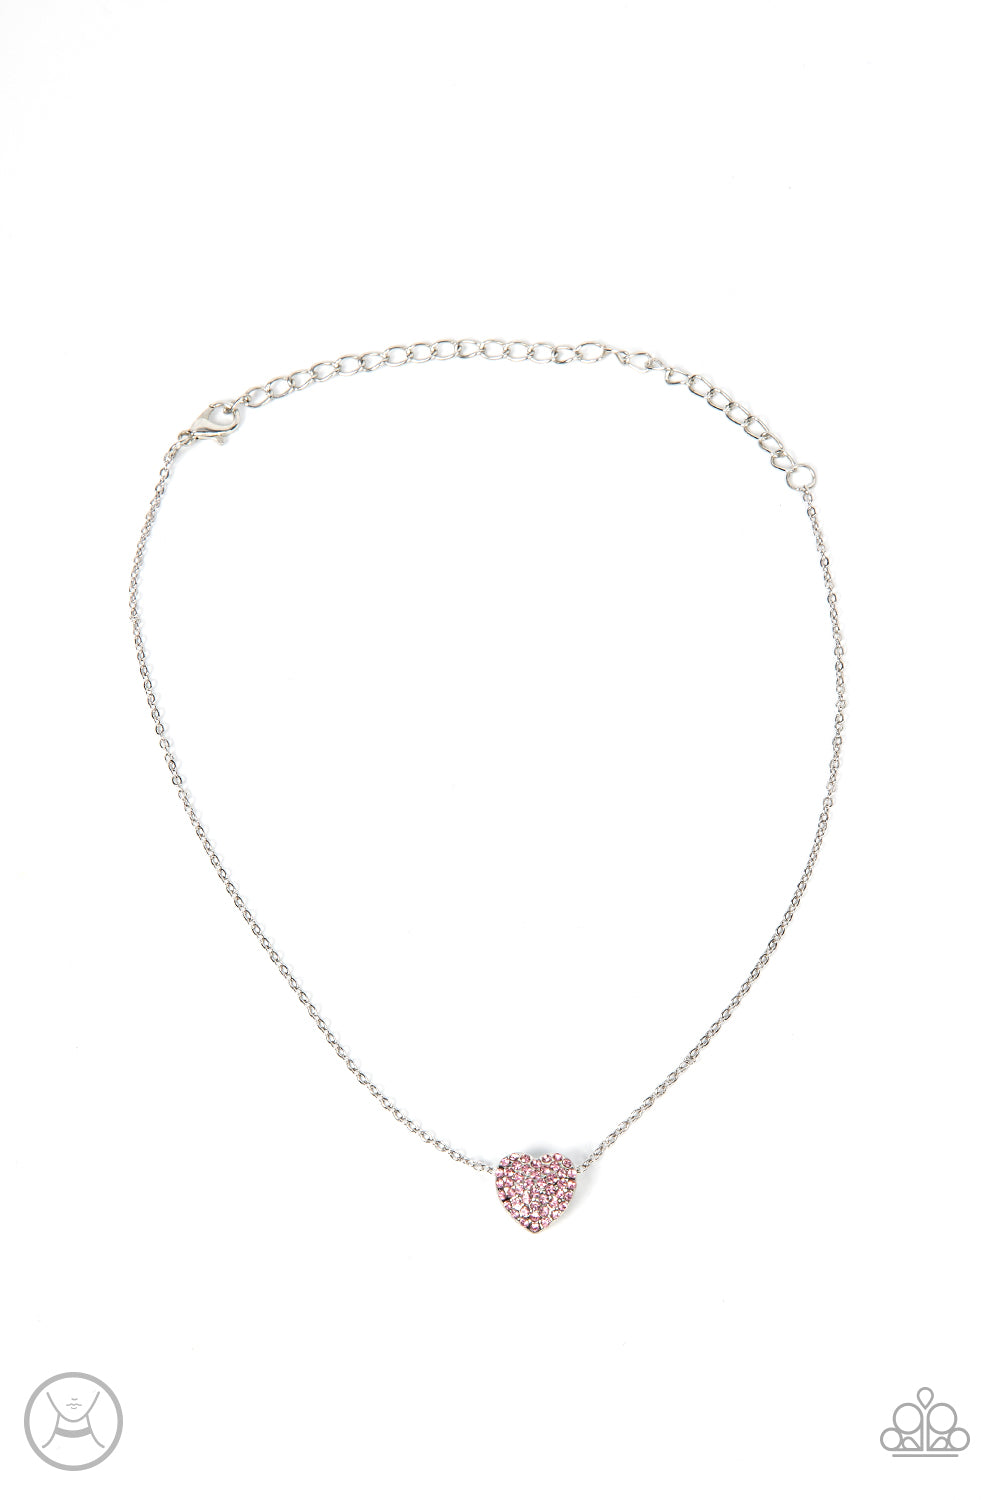 Twitterpated Twinkle Pink Necklace - Paparazzi Accessories  Encrusted in glassy pink rhinestones, a dainty heart frame sparkles along a dainty silver chain around the neck for a flirty finesse. Features an adjustable clasp closure.  Sold as one individual choker necklace. Includes one pair of matching earrings.